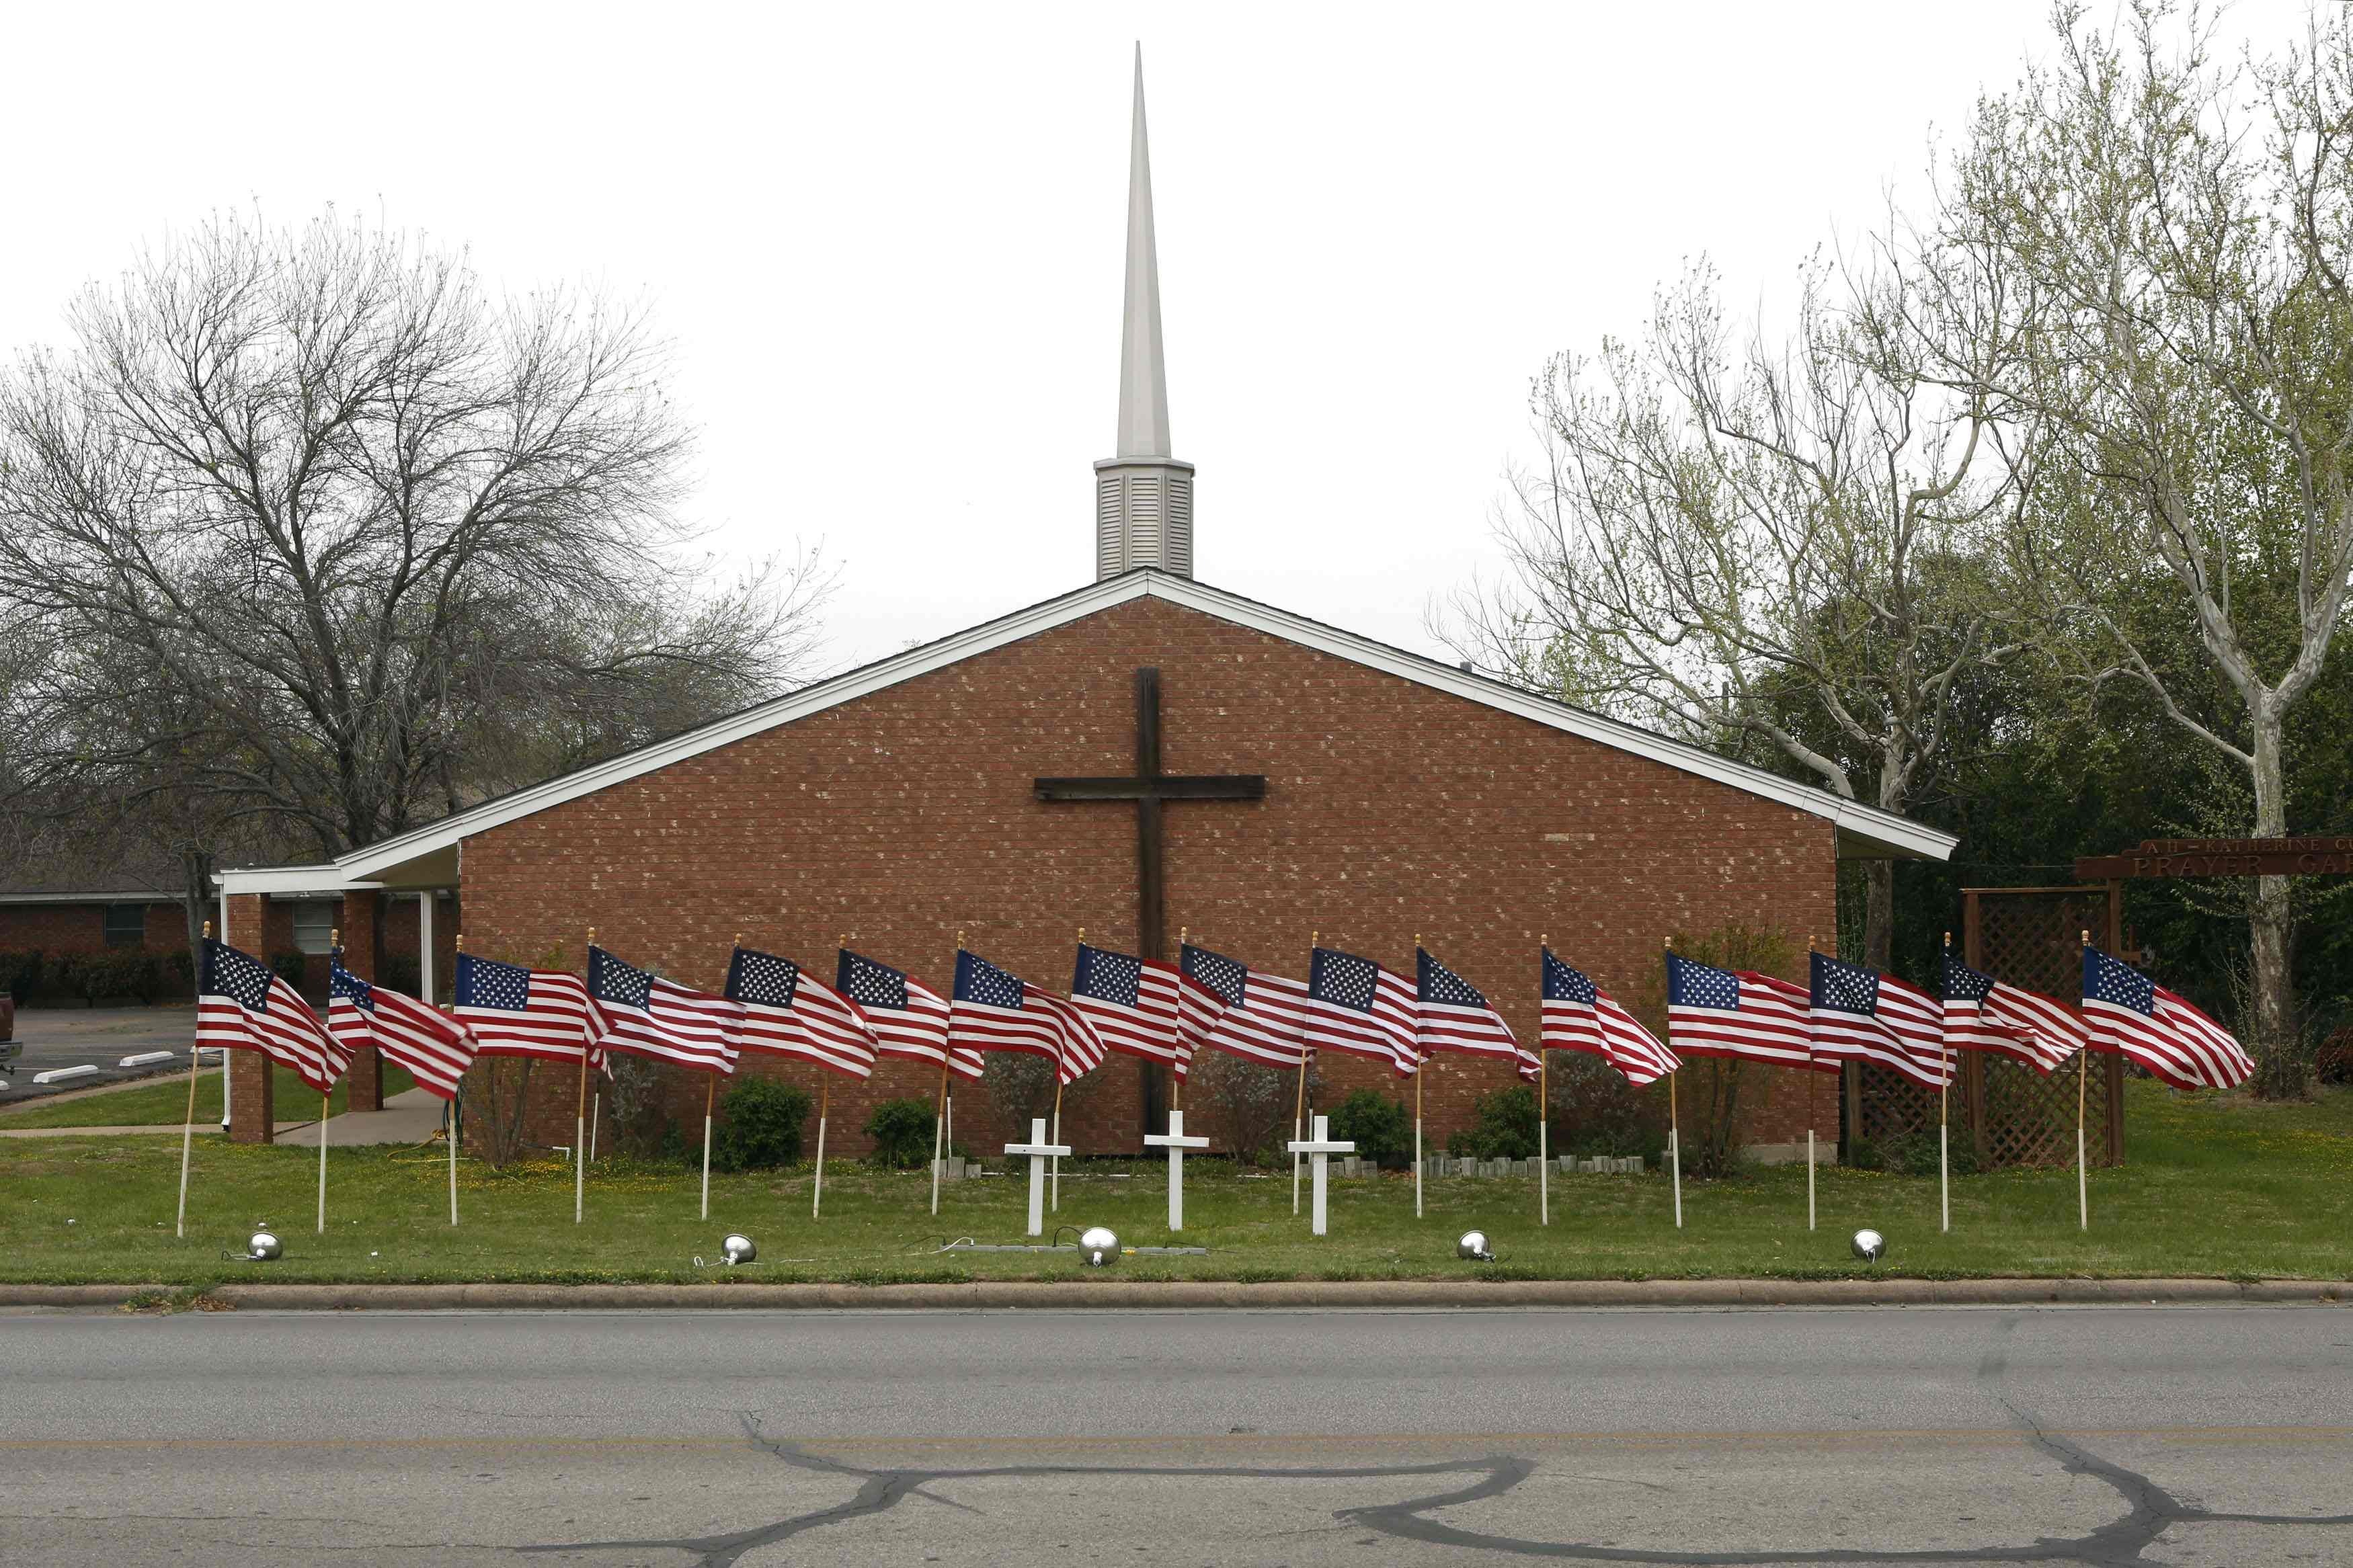 U.S. flags are pictured in front of the Central Christian Church in Killeen, Texas, April 3, 2014. (Erich Schlegel—Reuters)